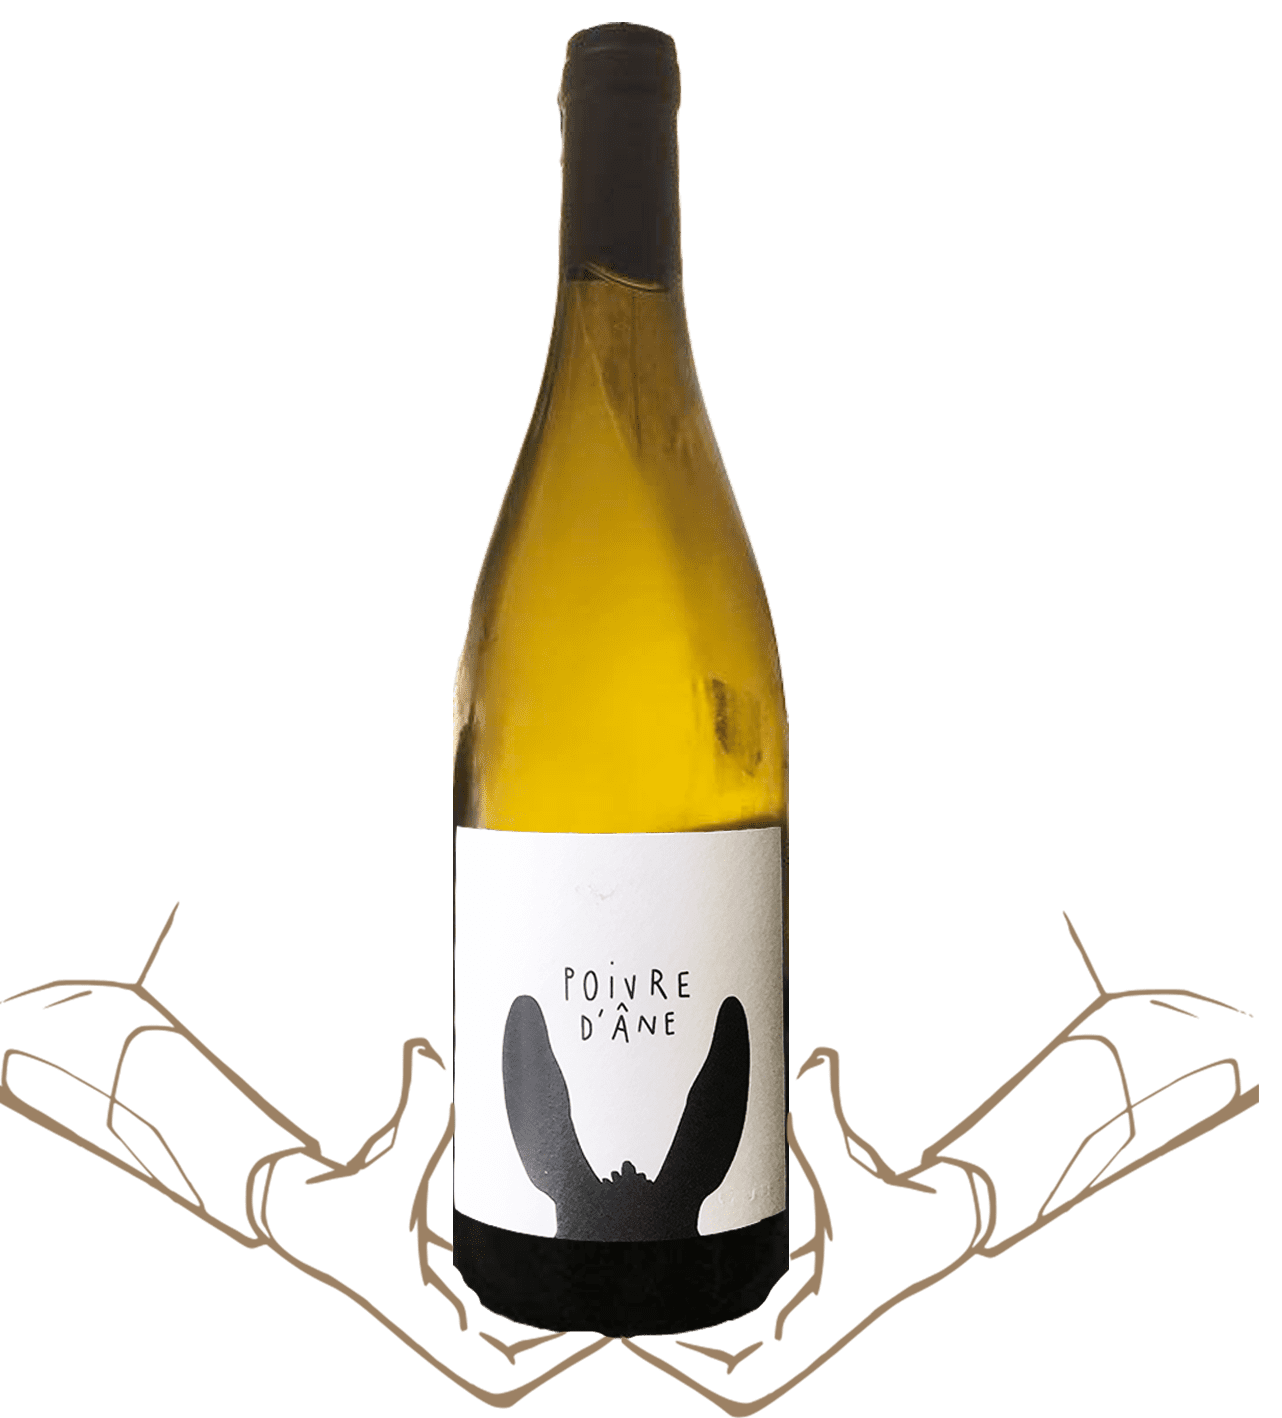 POIVRE D'ANE is white wine from Languedoc